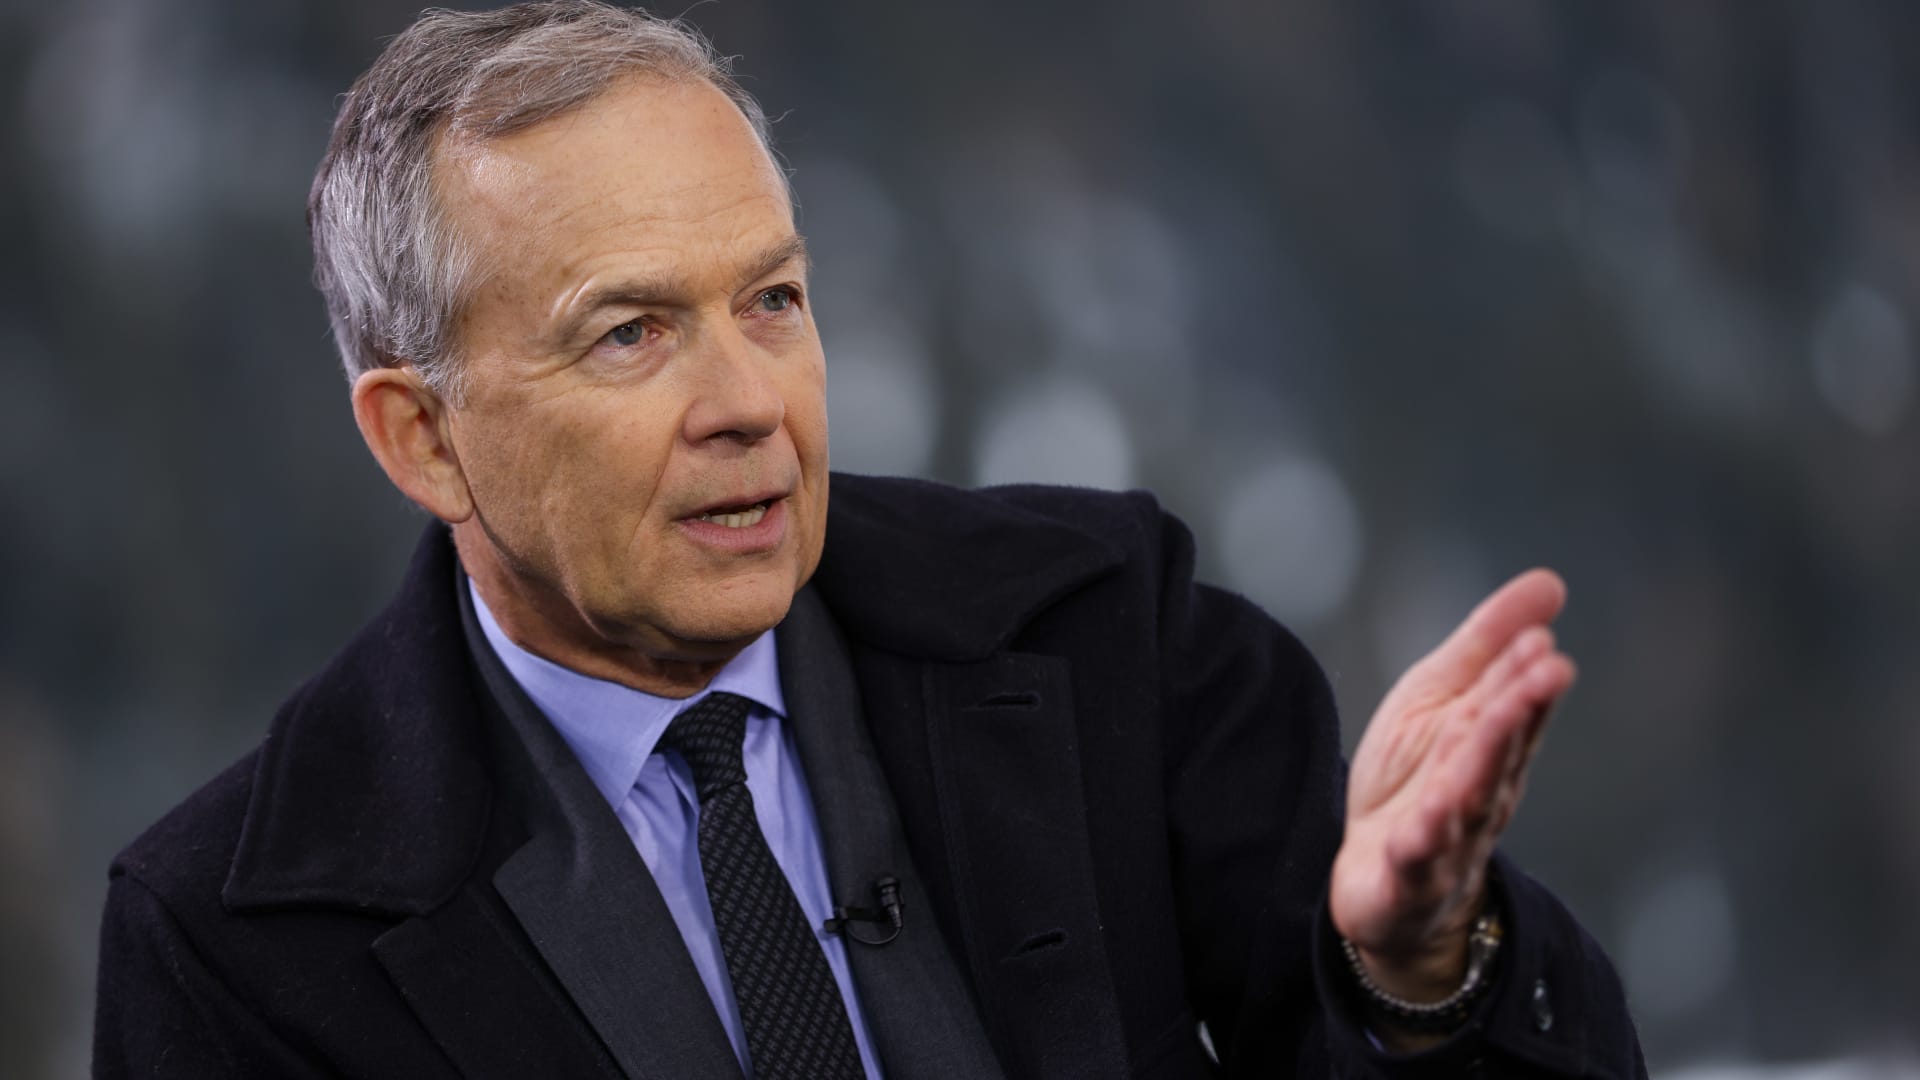 Bob Prince, co-chief investment officer at Bridgewater Associates LP, during a Bloomberg Television interview on the opening day of the World Economic Forum (WEF) in Davos, Switzerland, on Tuesday, Jan. 17, 2023.